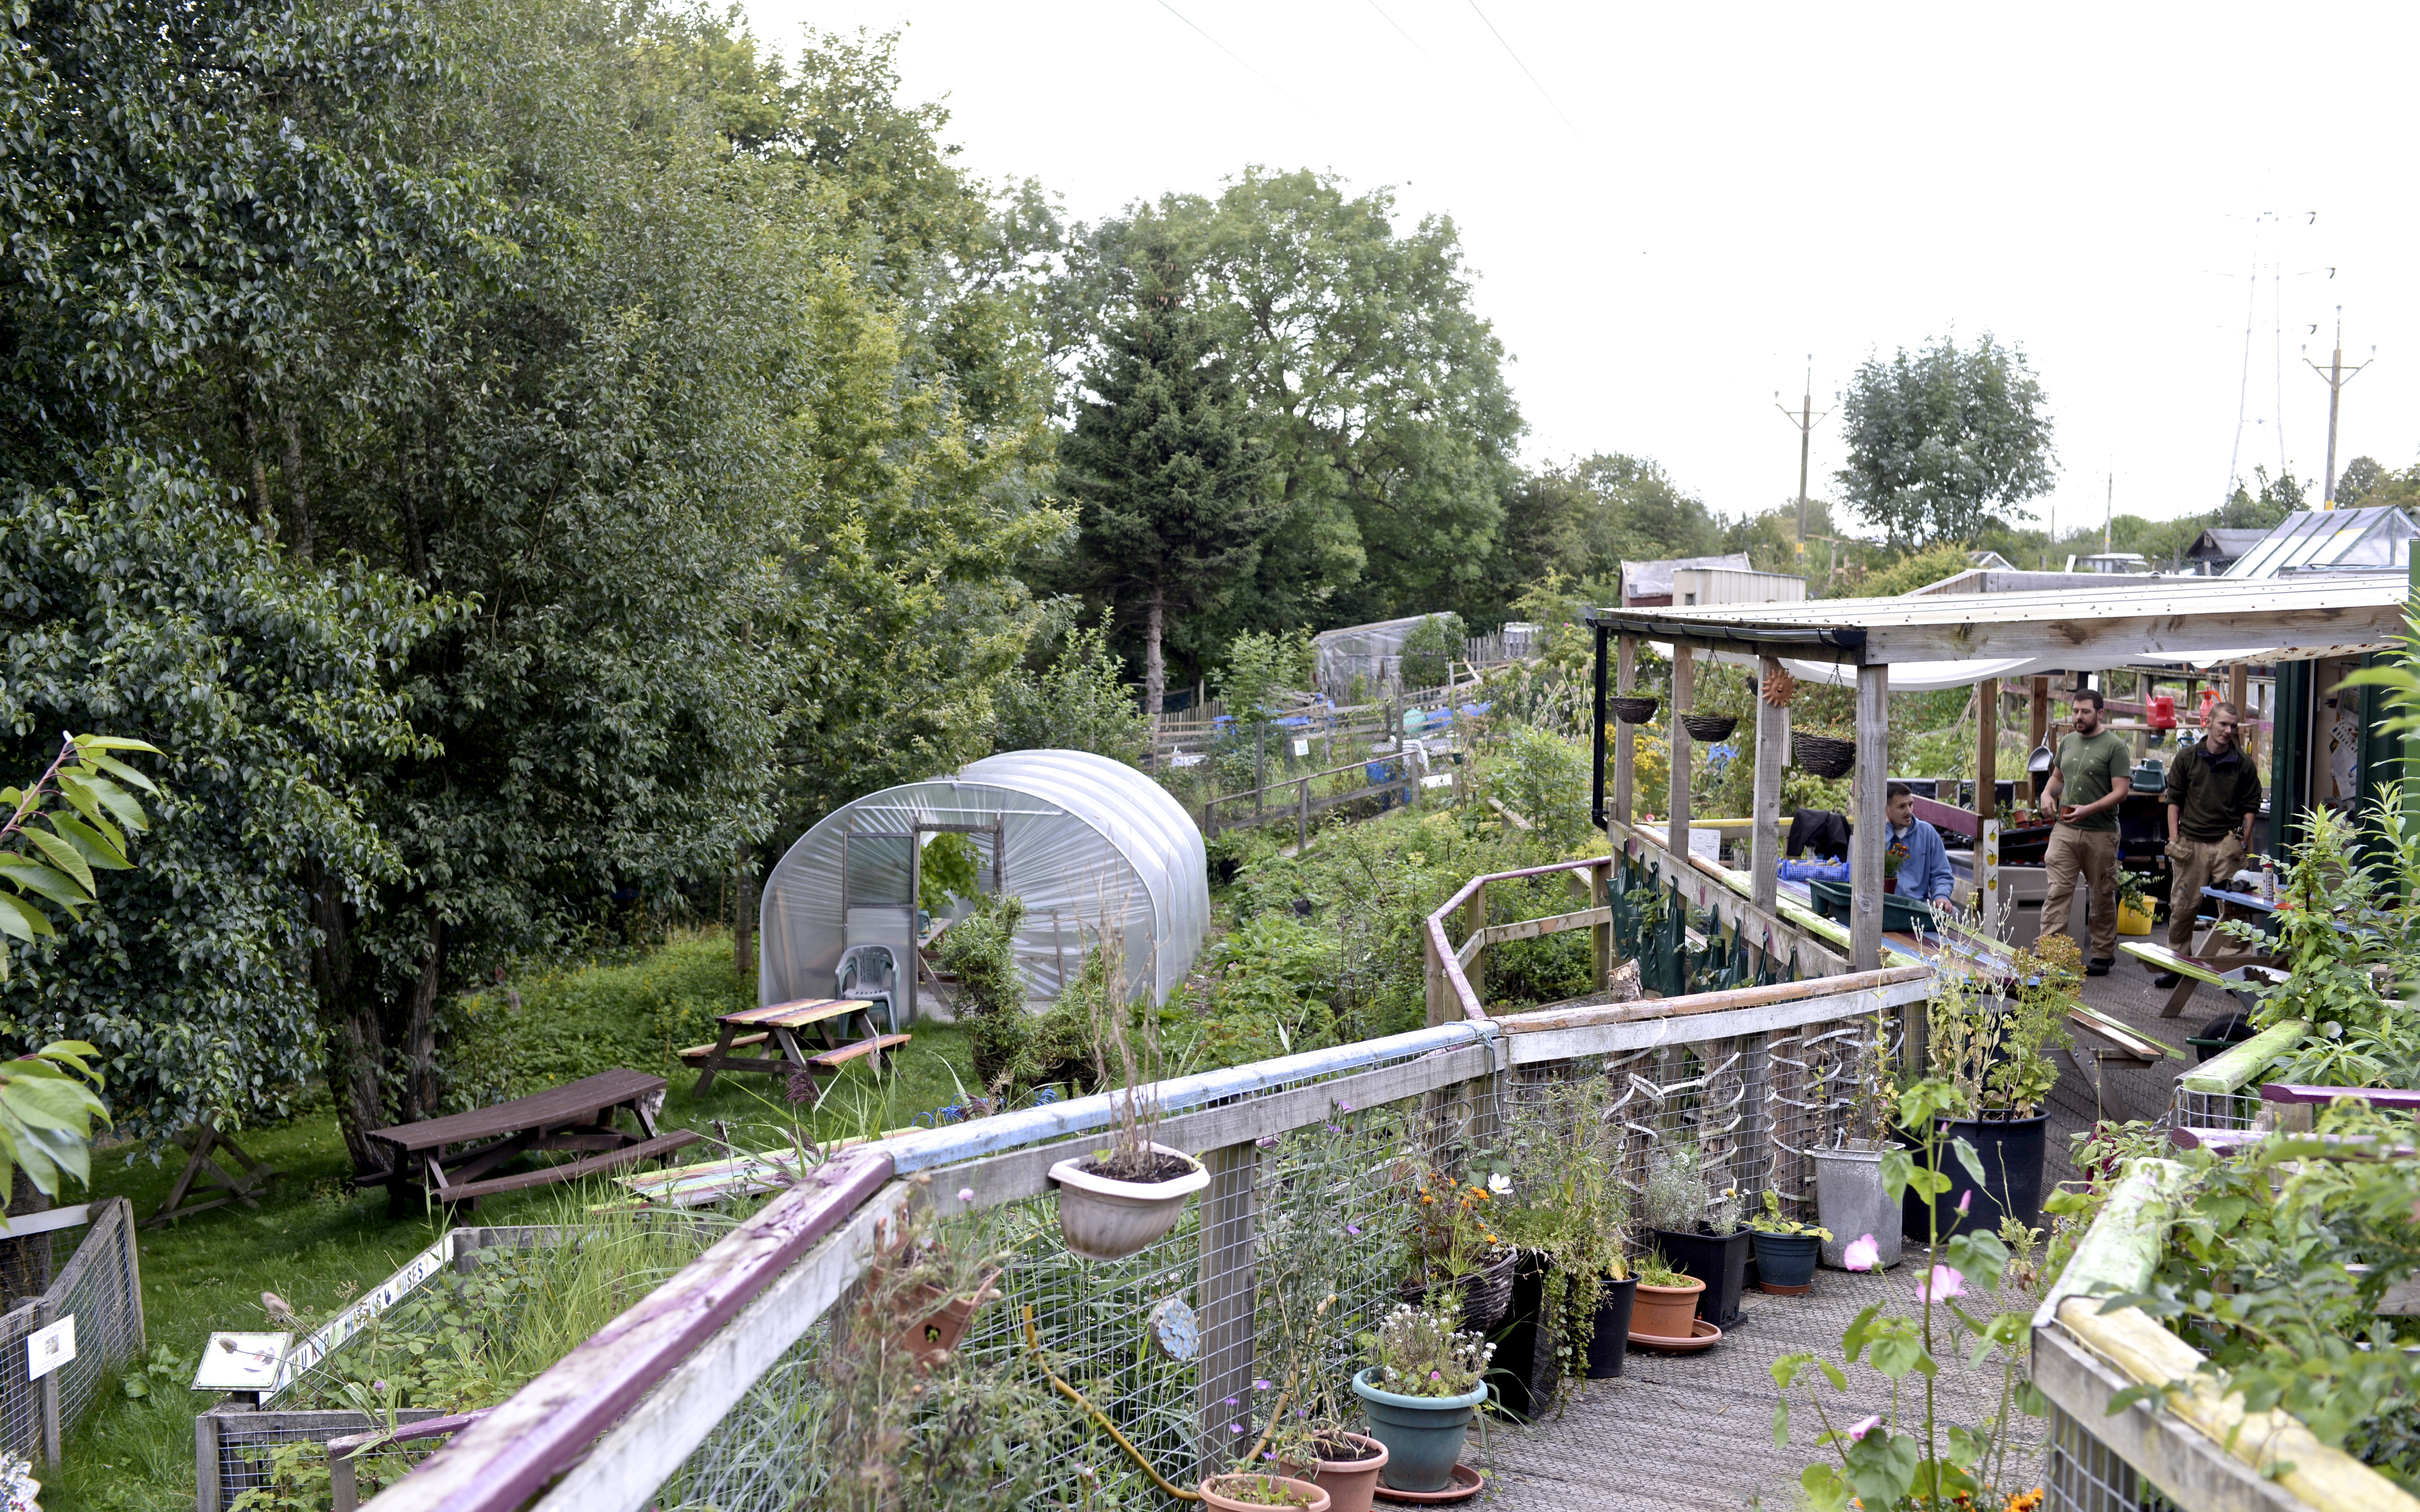 Pendle Leisure Trust’s Good Life Project is throwing open its garden gates to visitors.